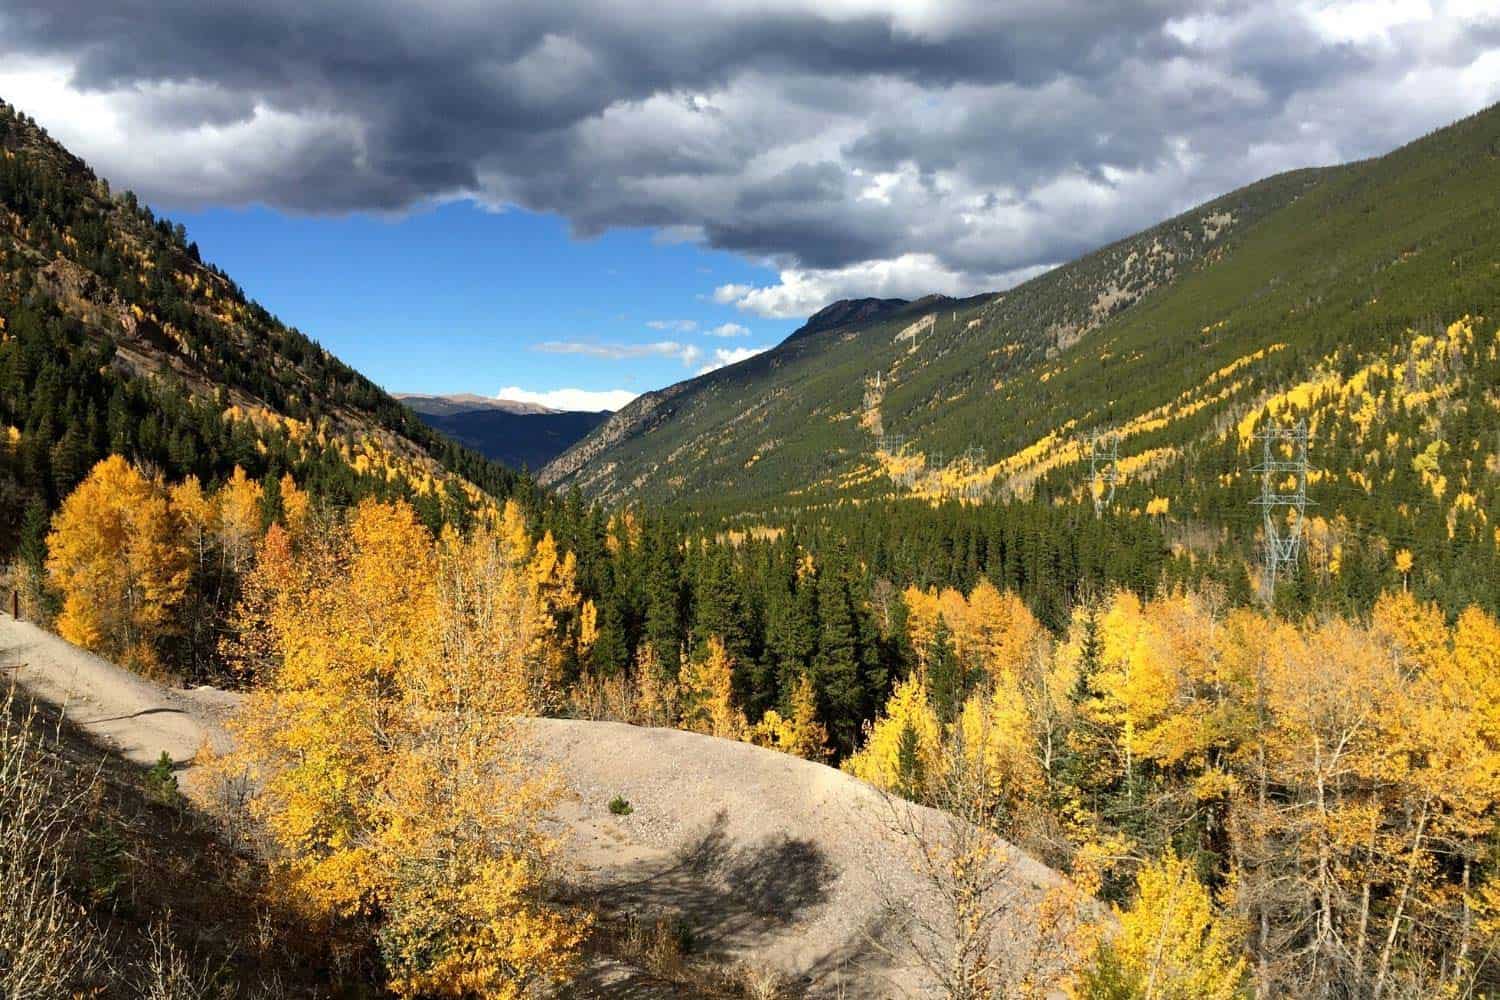 13 Best Free Camping Spots in Colorado